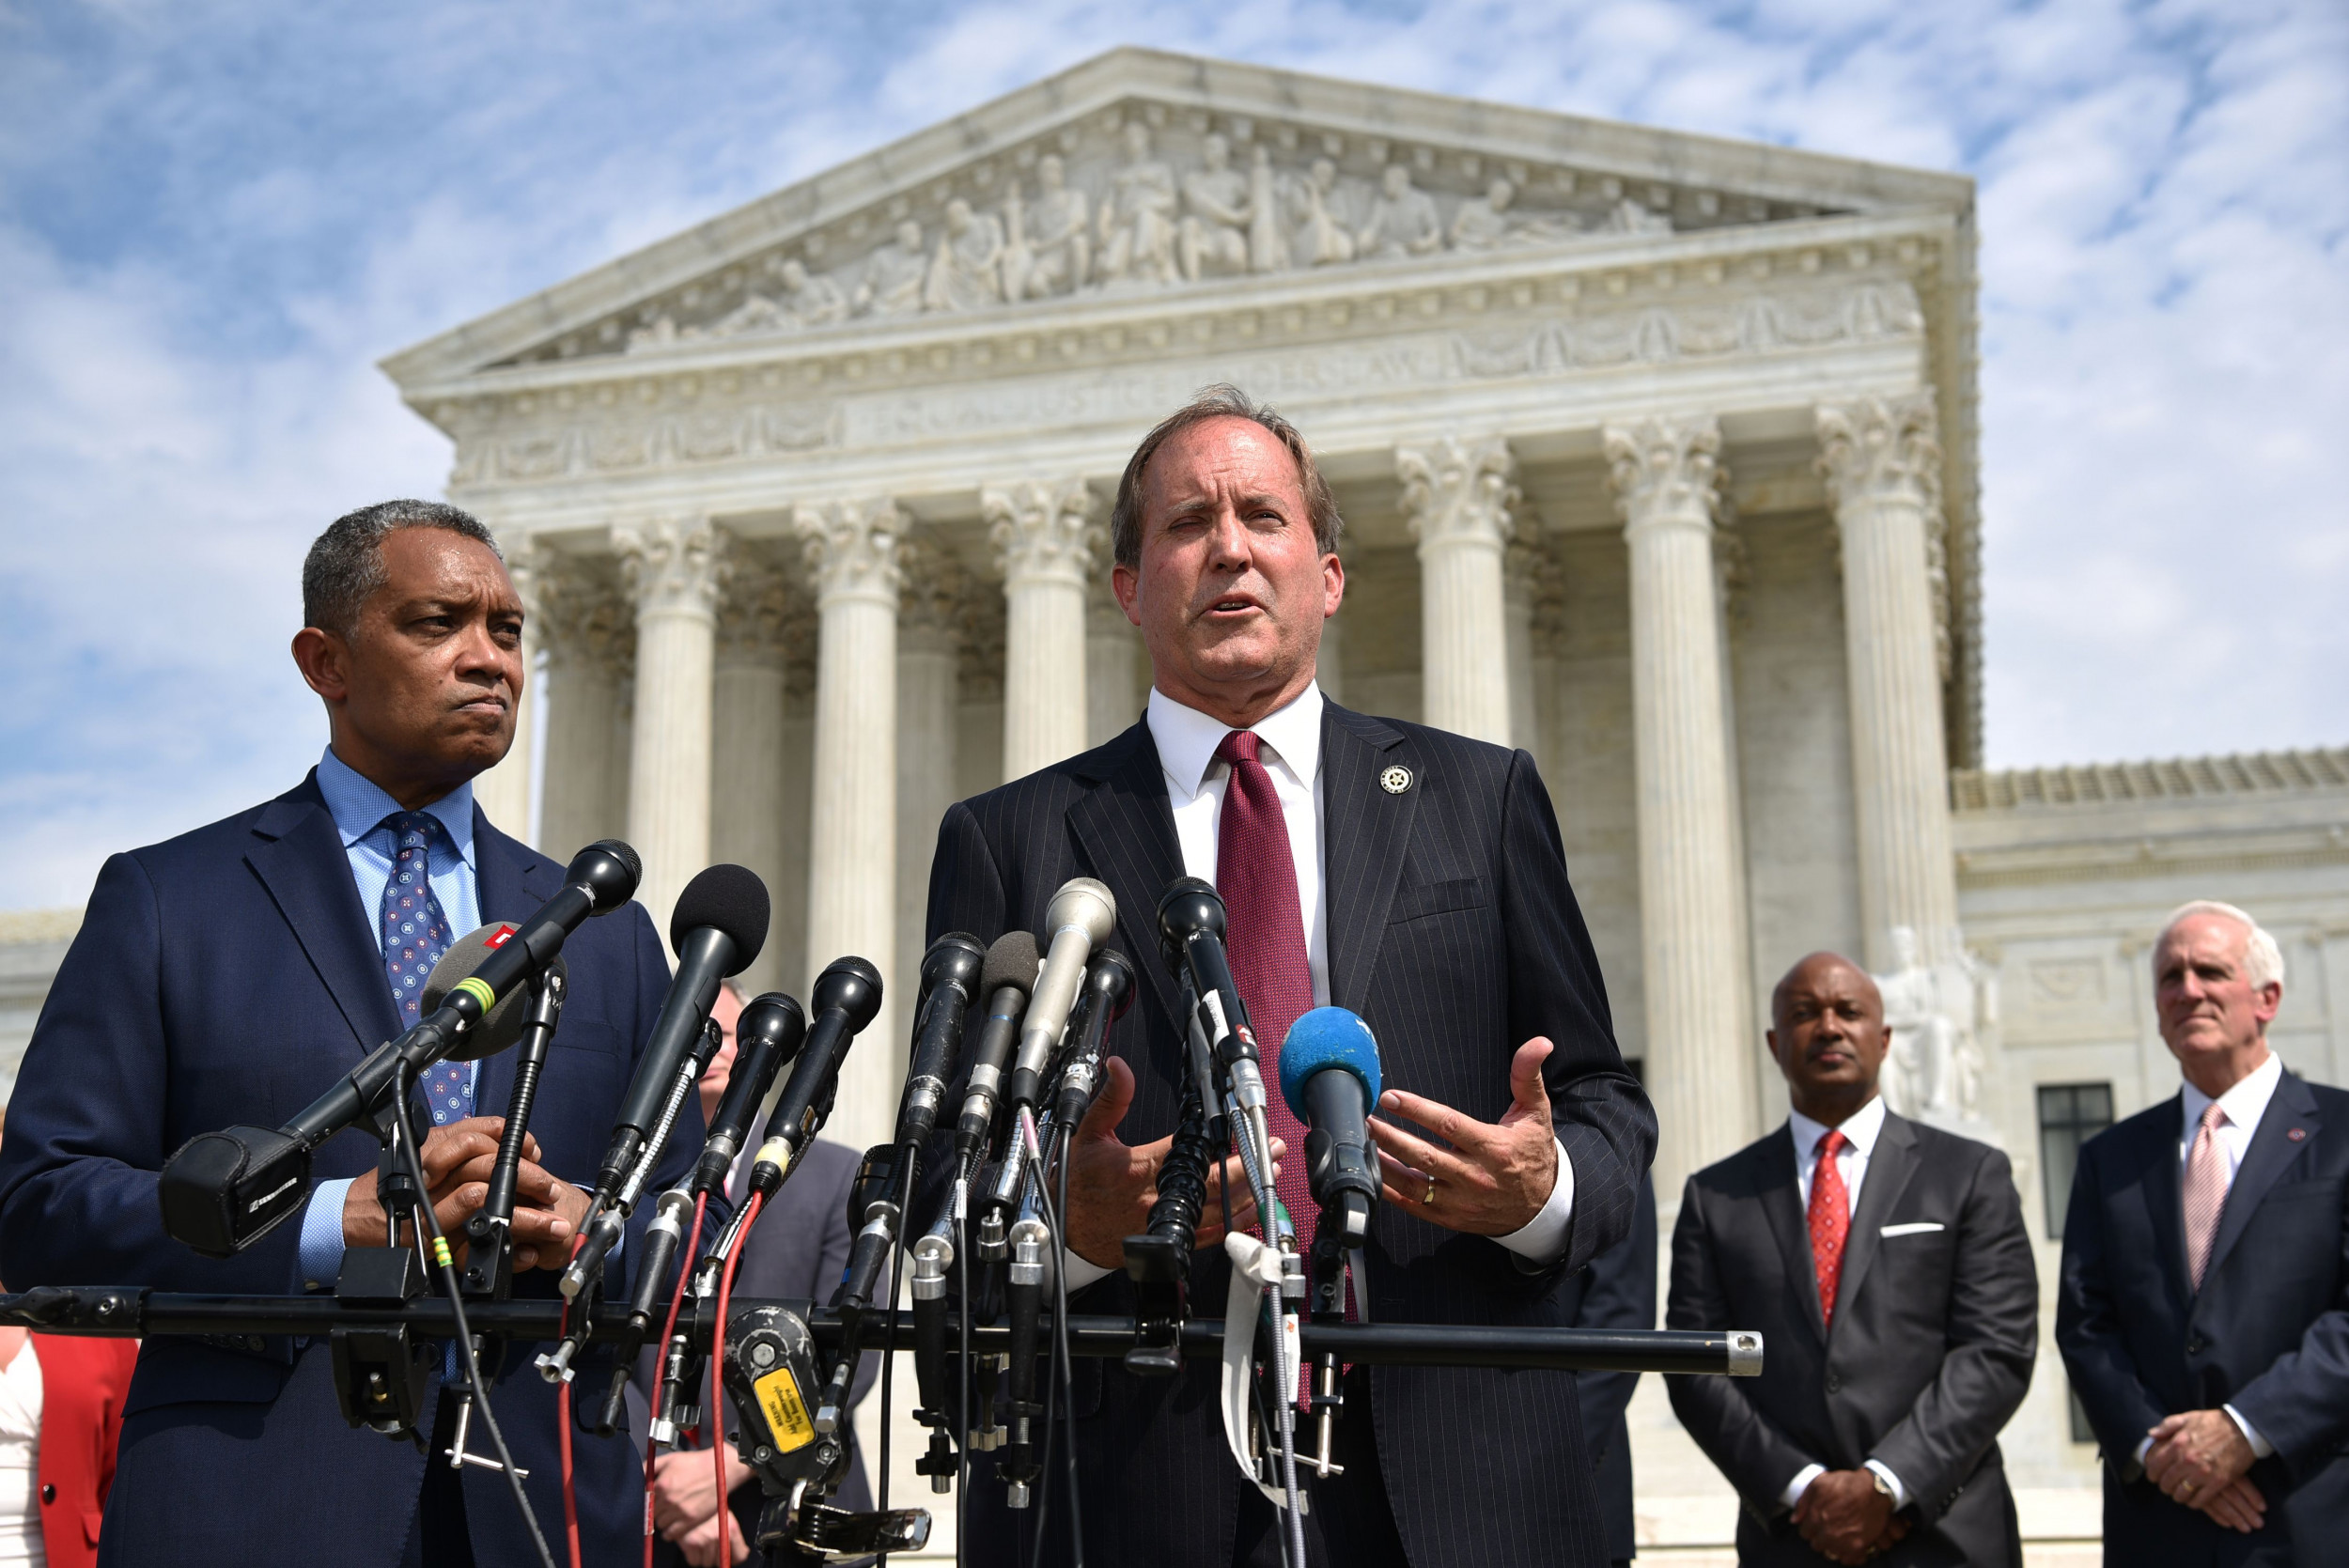 Texas Files Lawsuit With SCOTUS Challenging Election ...